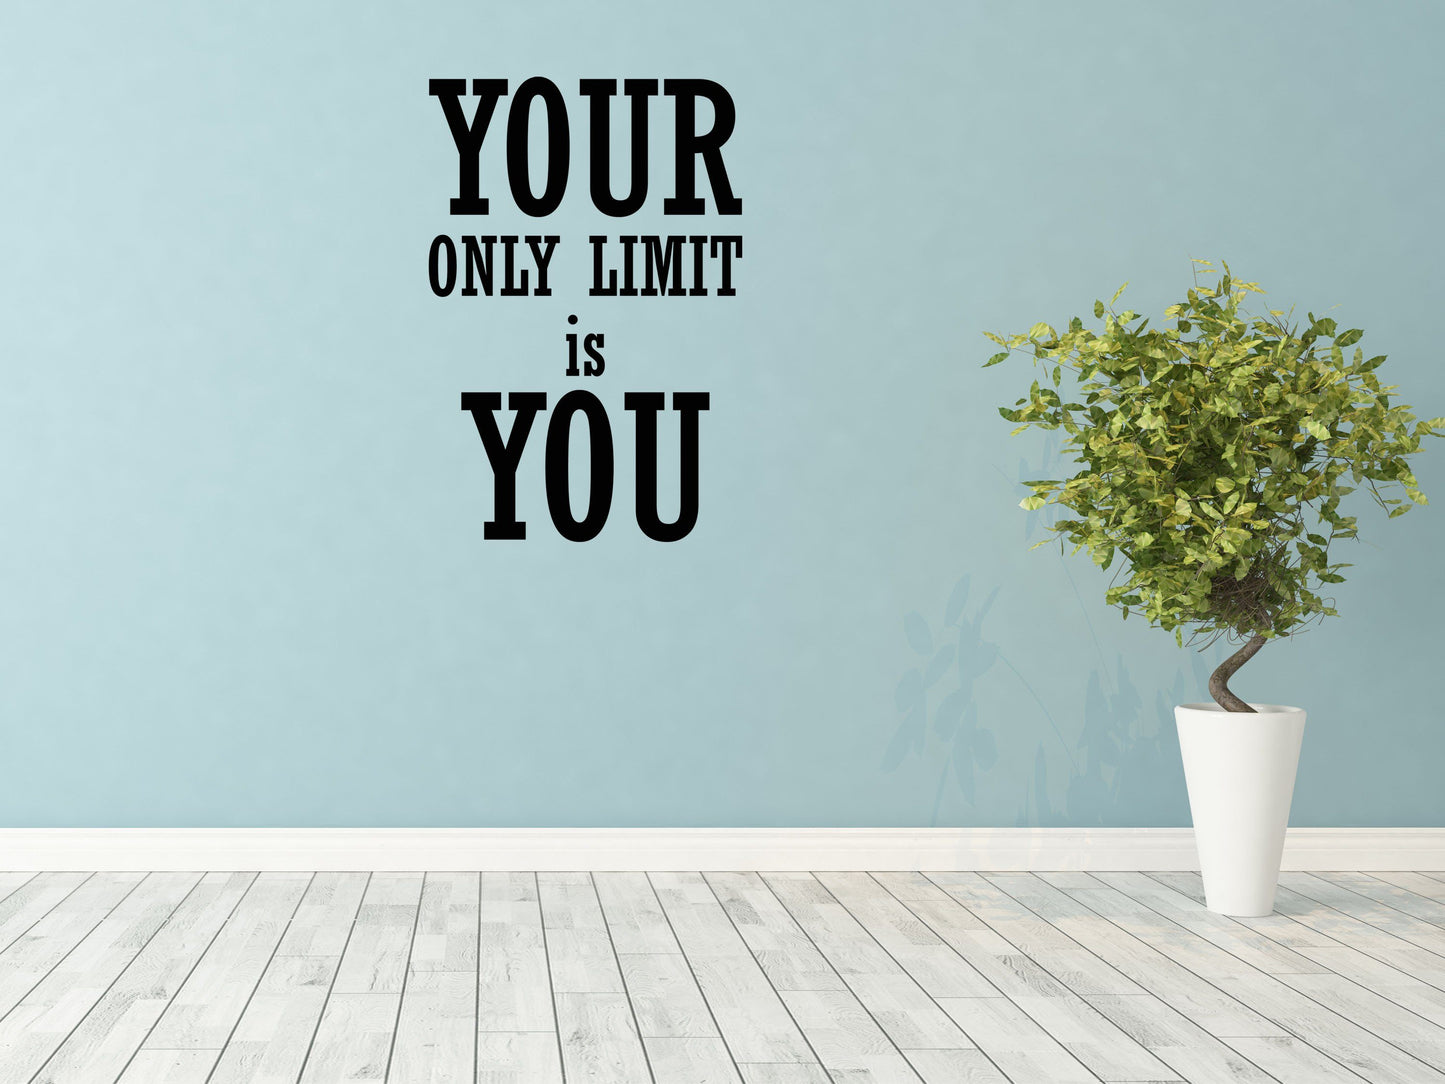 Your Only Limit Is You Business Office Wall Sticker Quote - Inspirational Wall Decals Home Decor Decals Done 